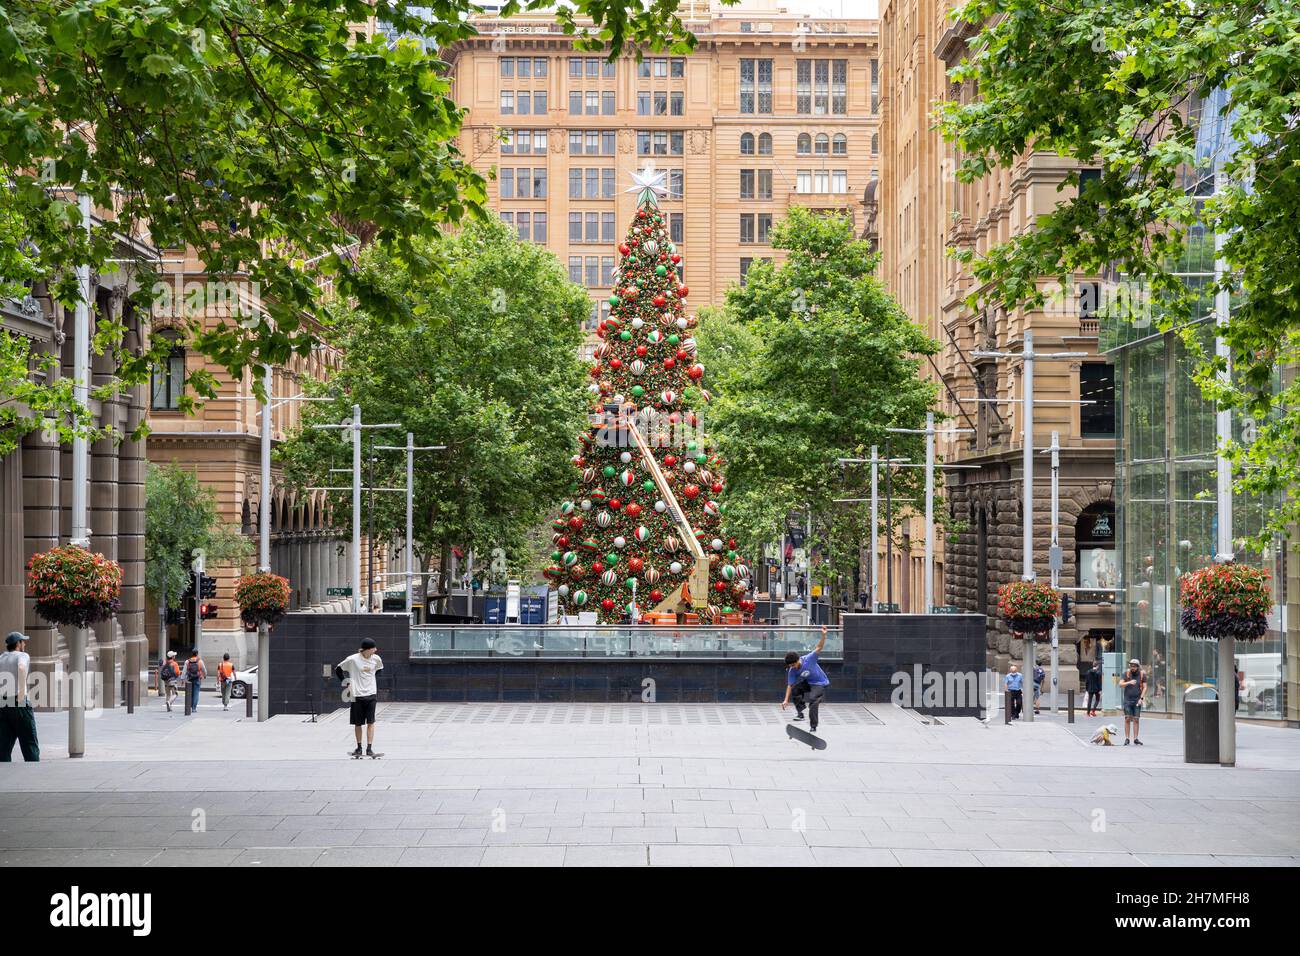 Large decorated Christmas tree with people around at Martin Place in Sydney, Australia on 20 November 20021. Ornaments can be seen on the tree. Stock Photo